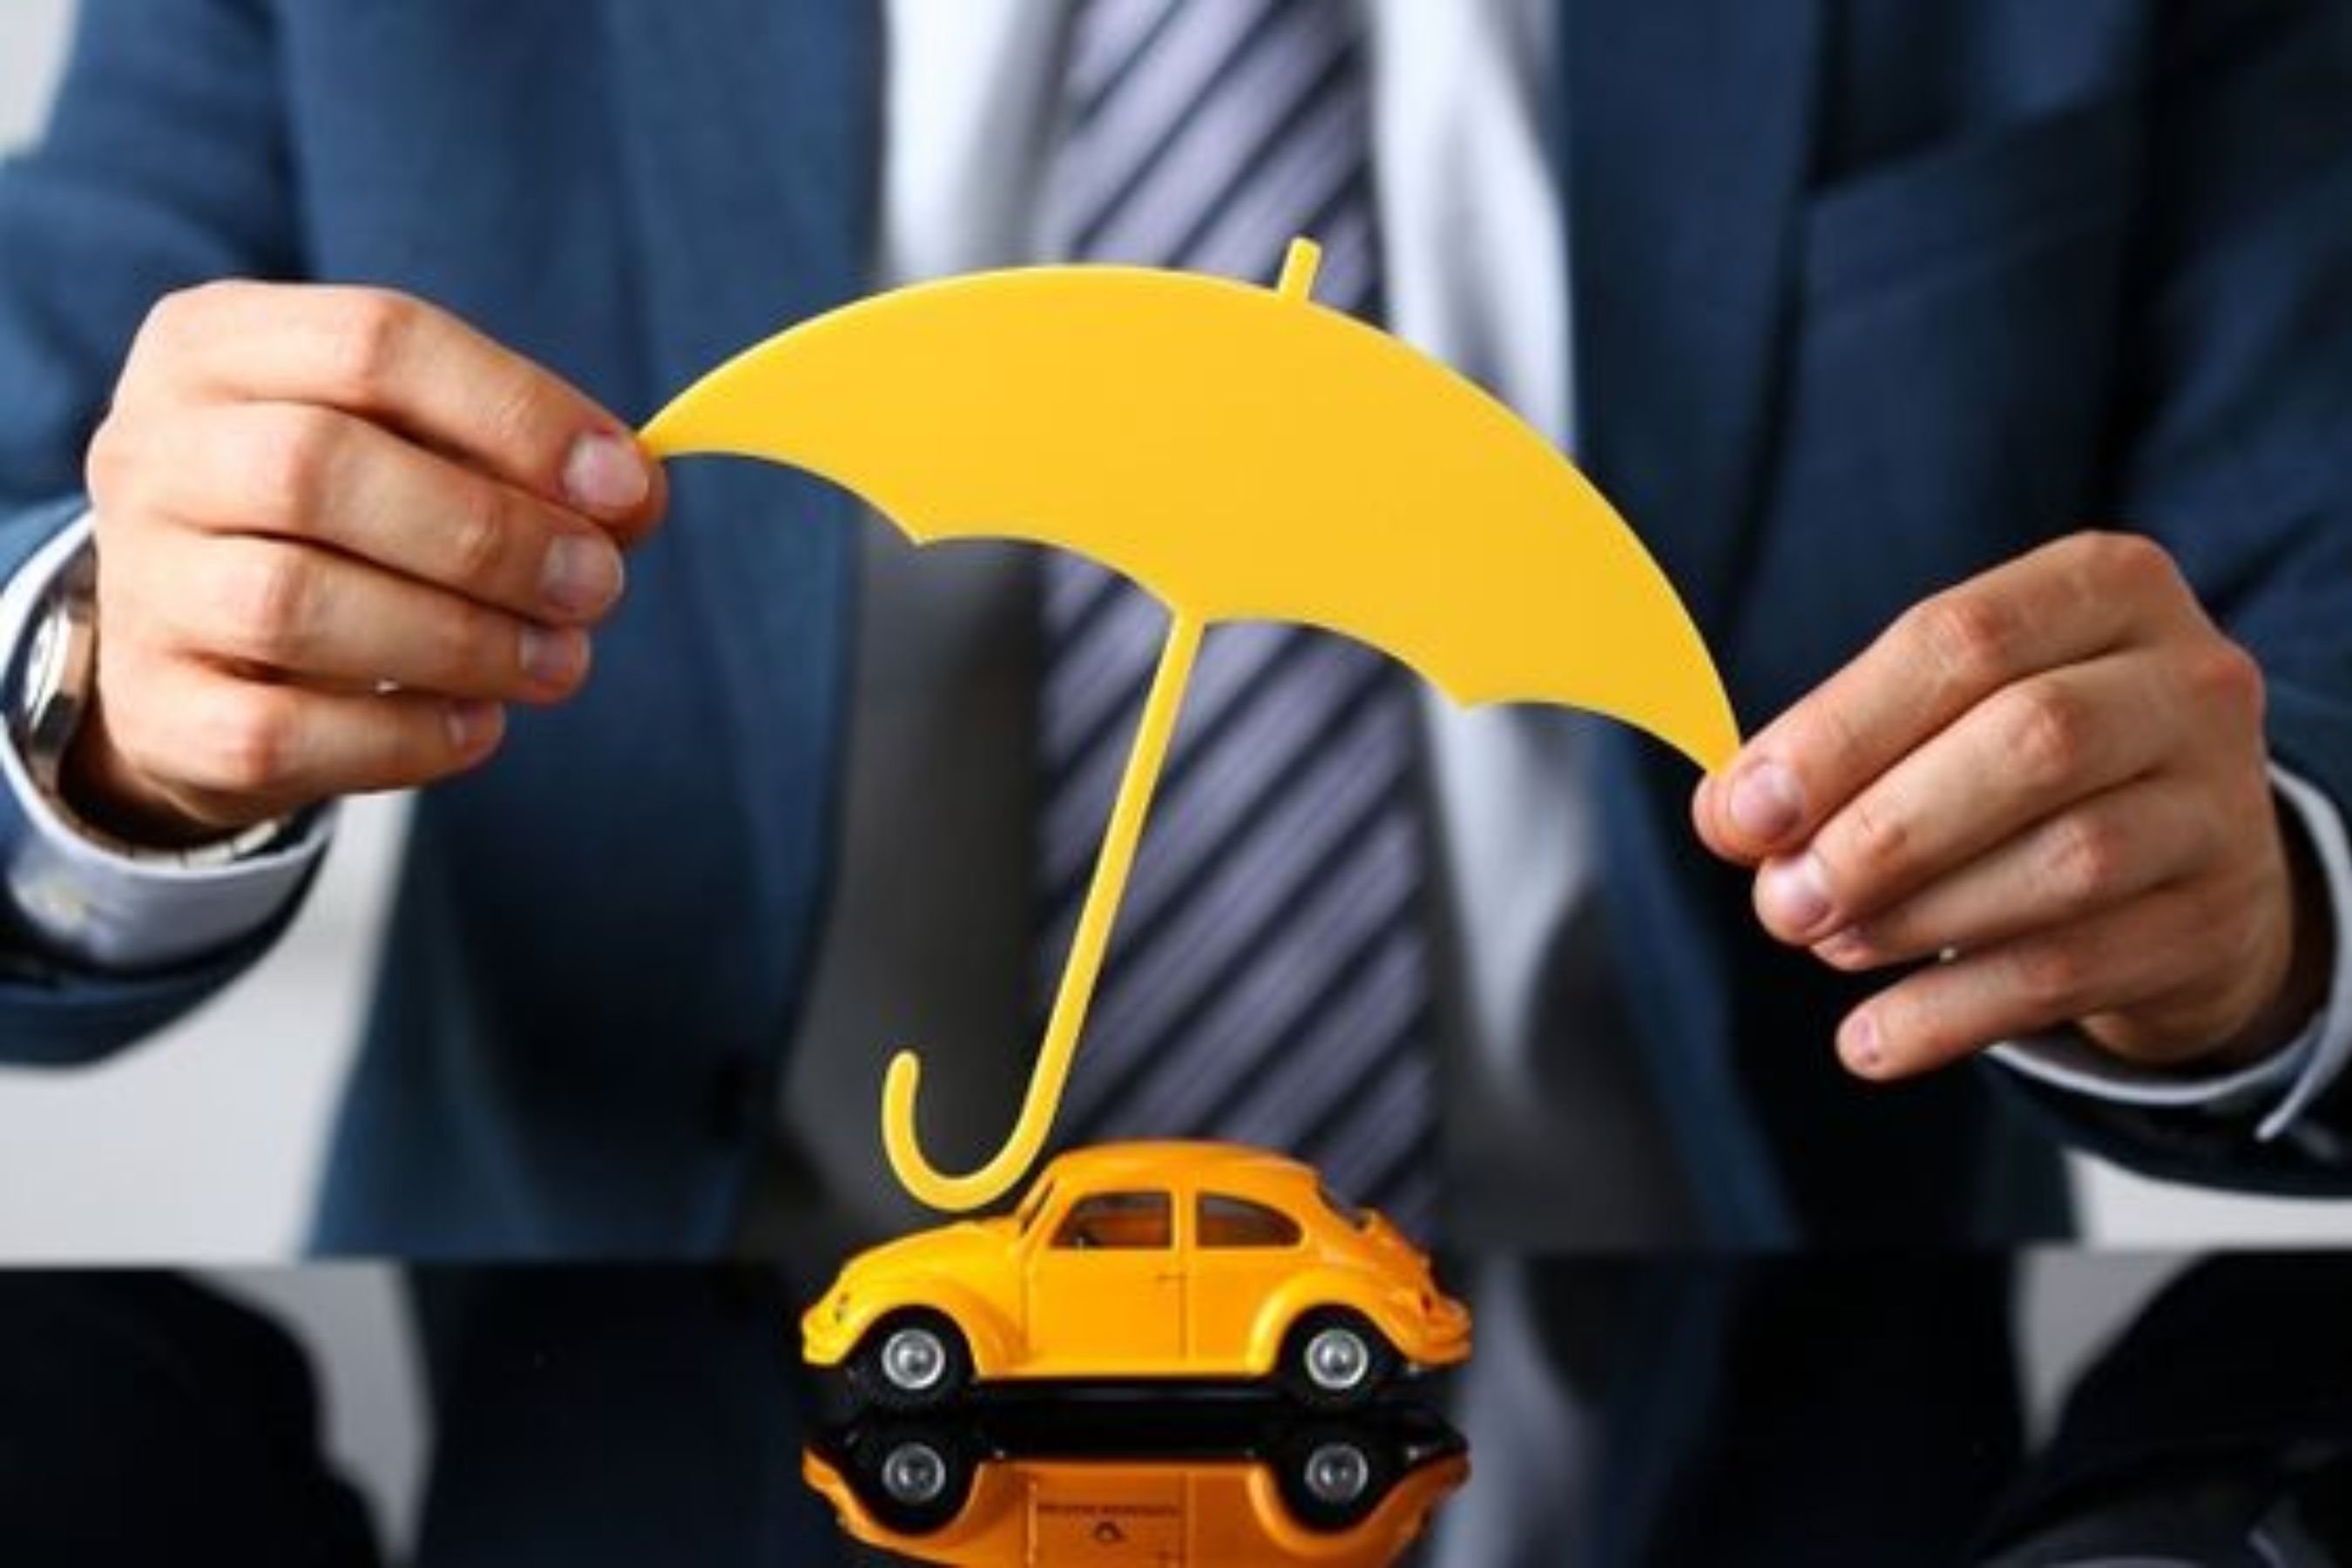 Start Getting Deals: Evaluate Car Insurance Quotes in the UAE